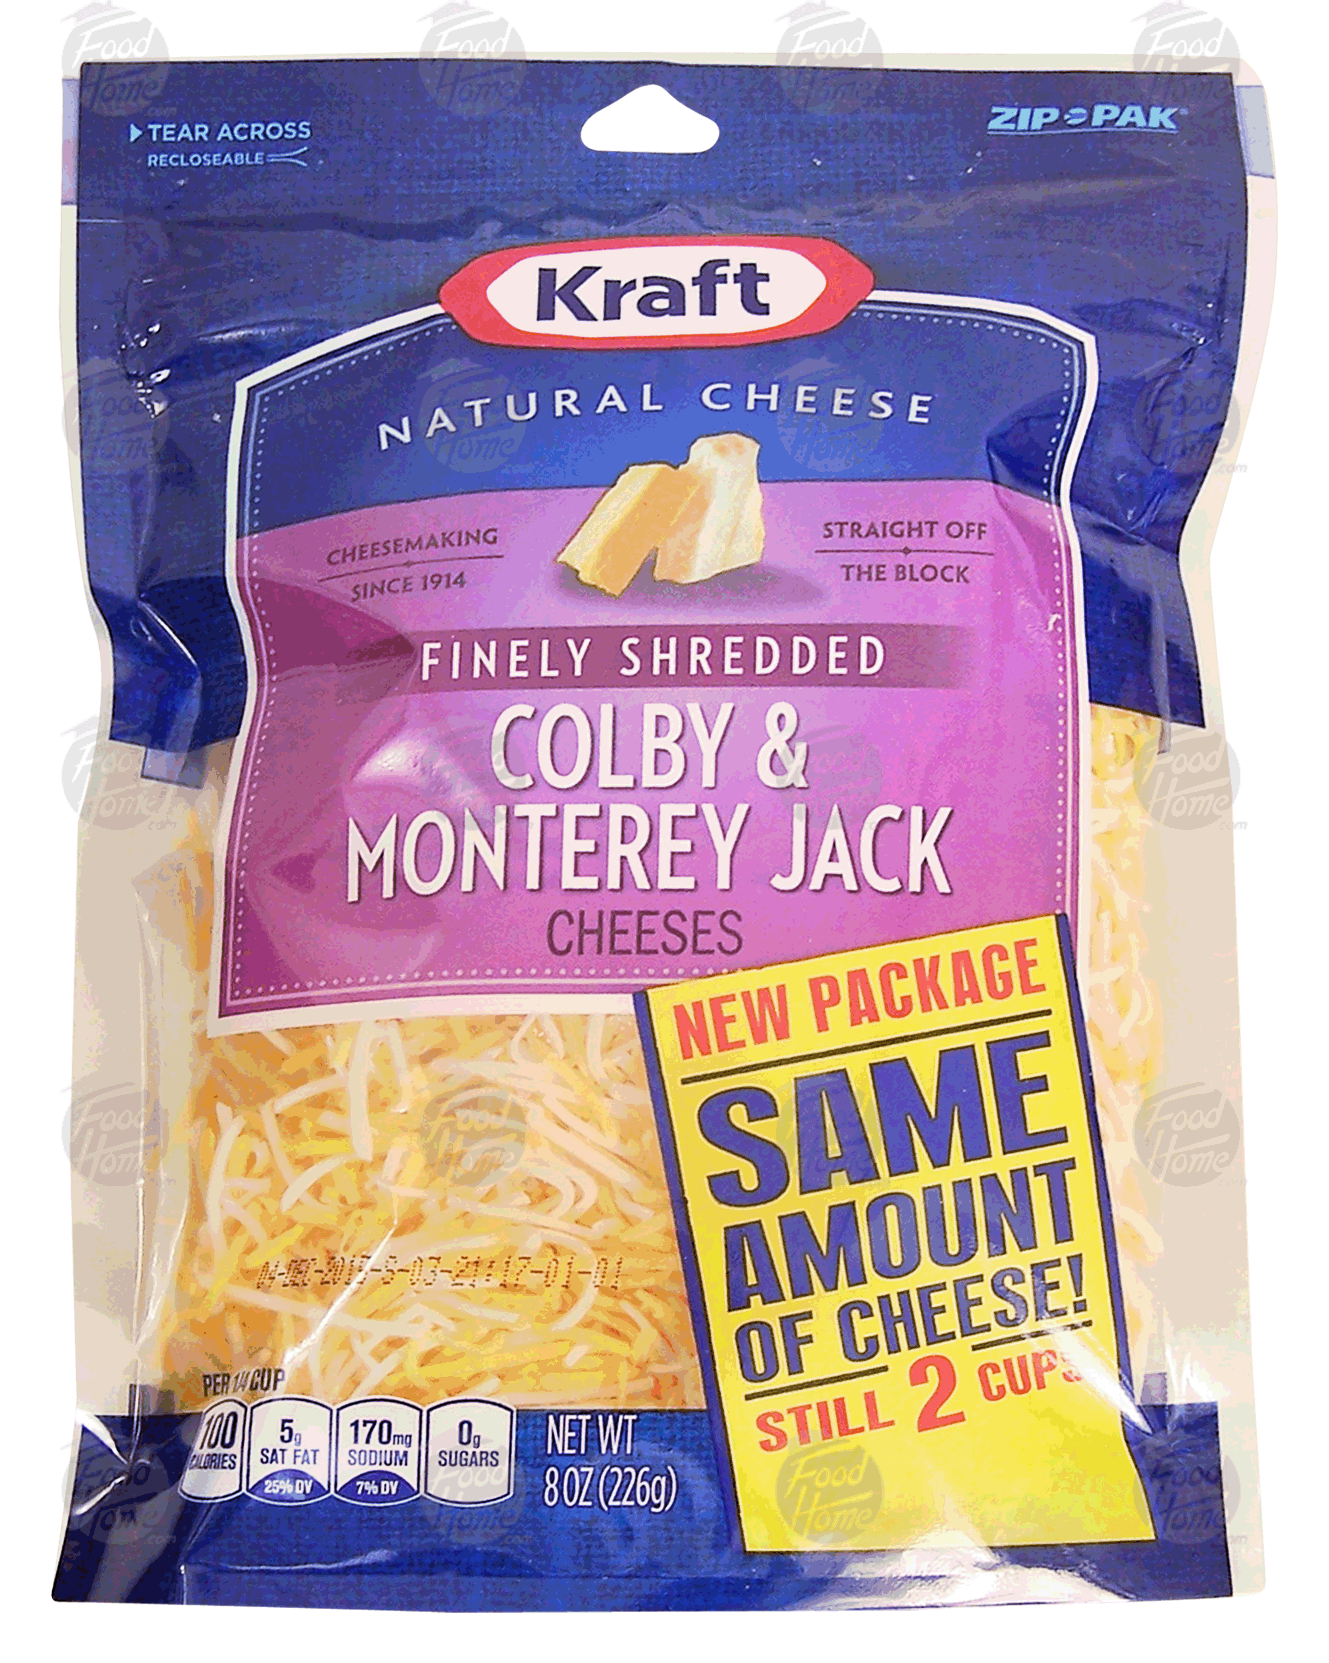 Kraft Natural Cheese colby & monterey jack finely shredded cheese Full-Size Picture